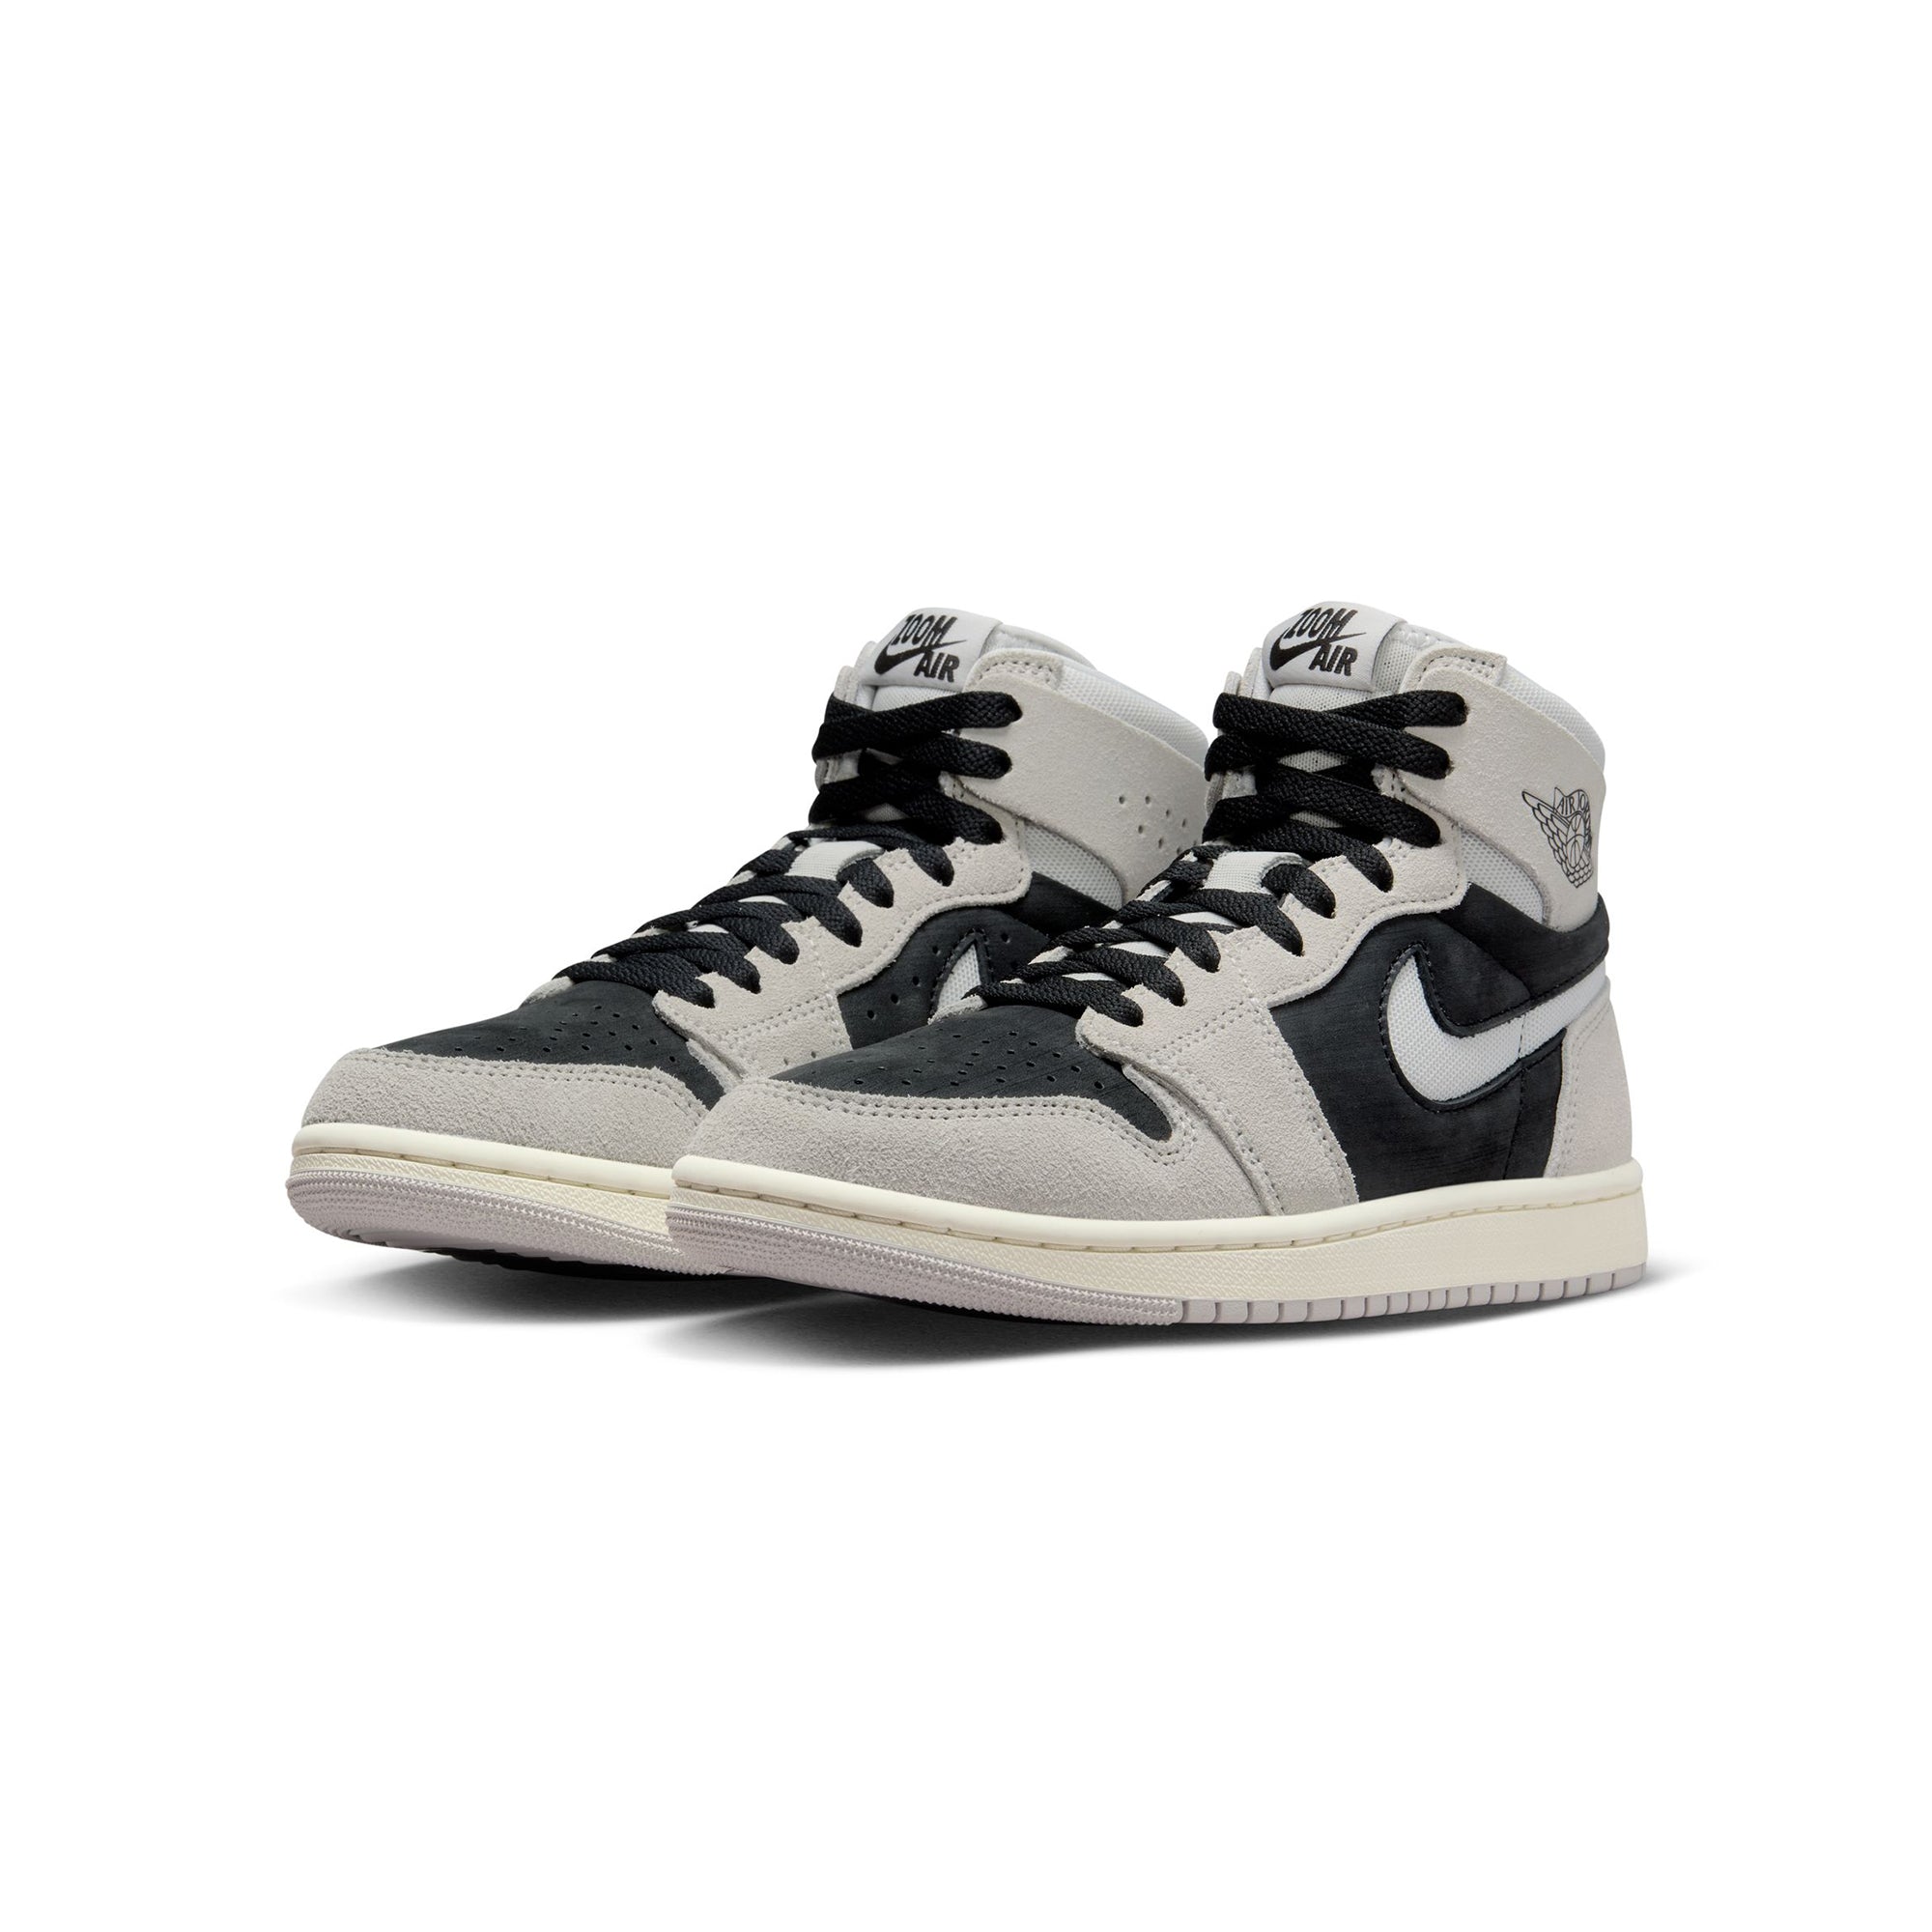 Air Jordan 1 Womens Zoom Comfort 2 Shoes 'Iron Ore' – Extra Butter